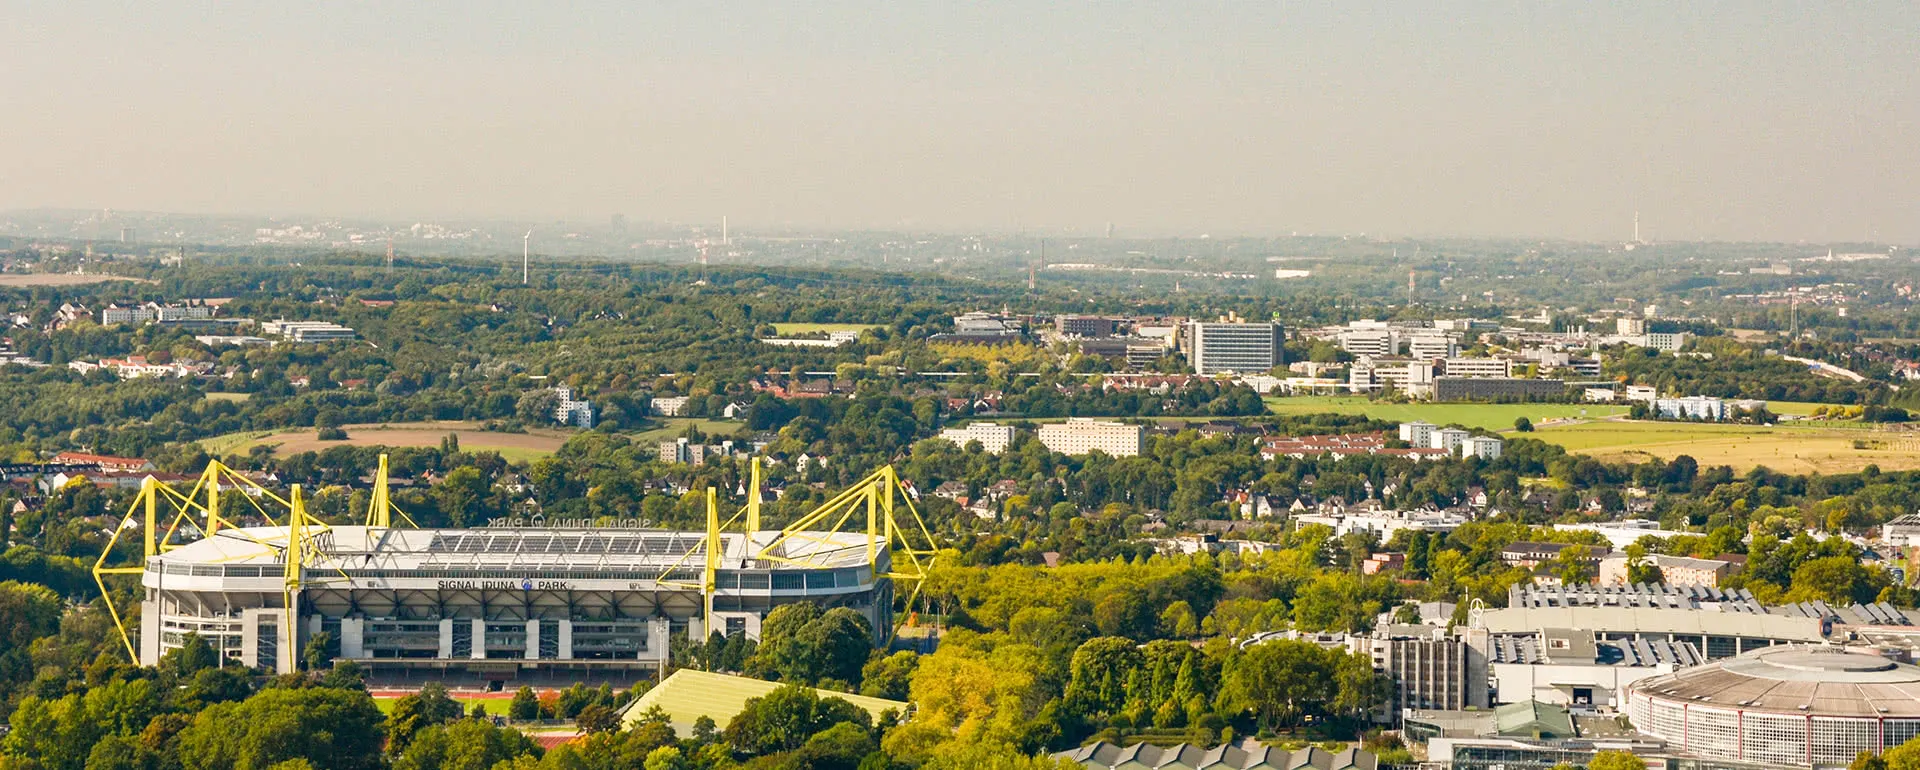 Meeting and conference location Dortmund